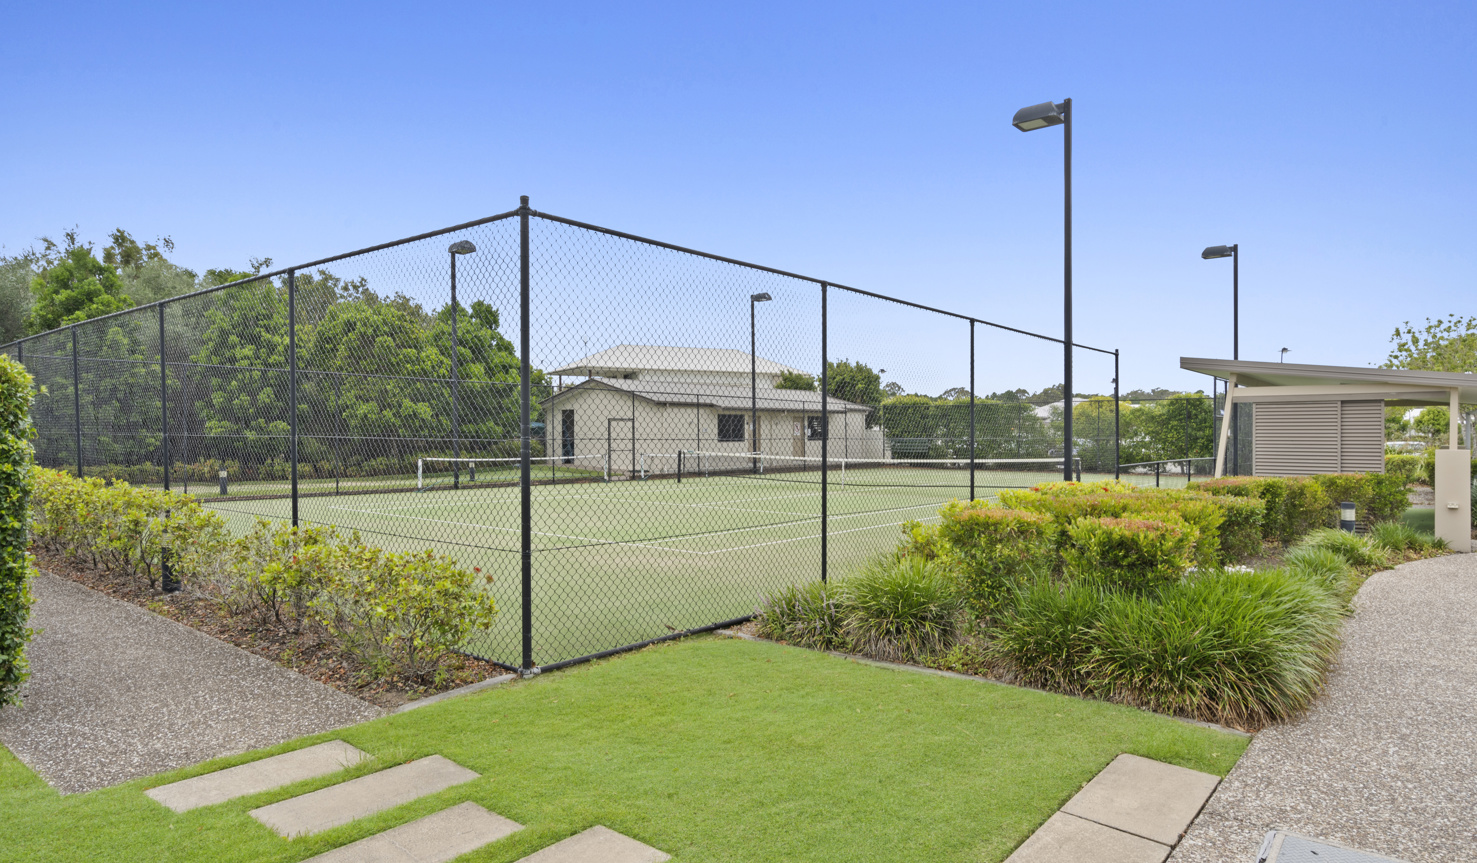 External shot of the Halcyon Waters floodlit tennis court